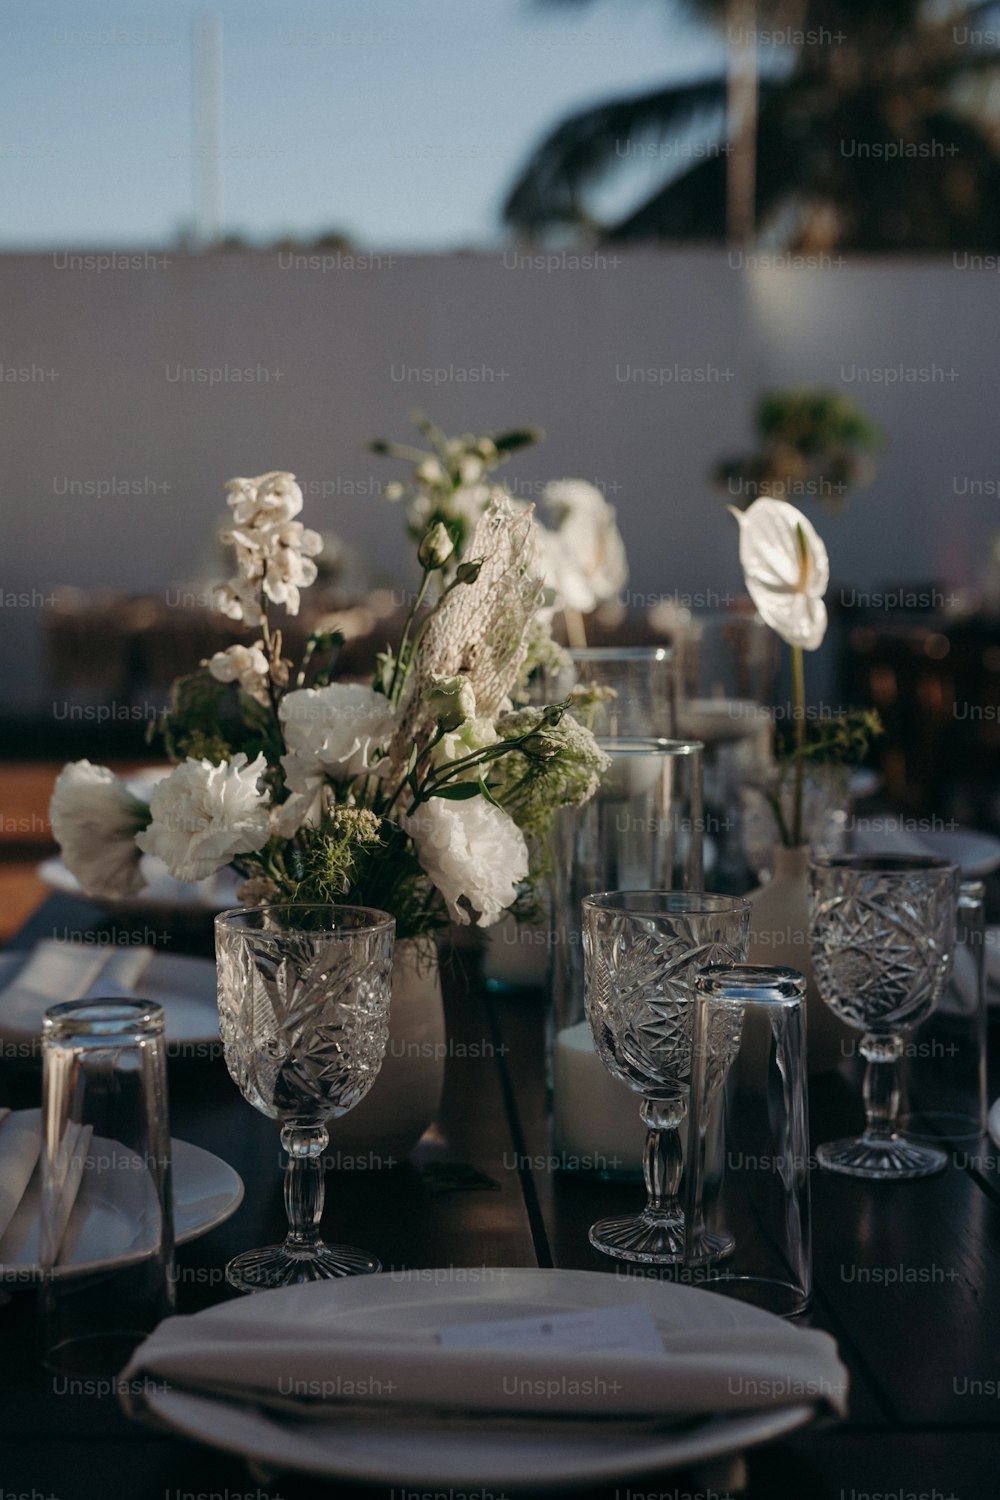 a table set for a formal dinner with flowers in vases